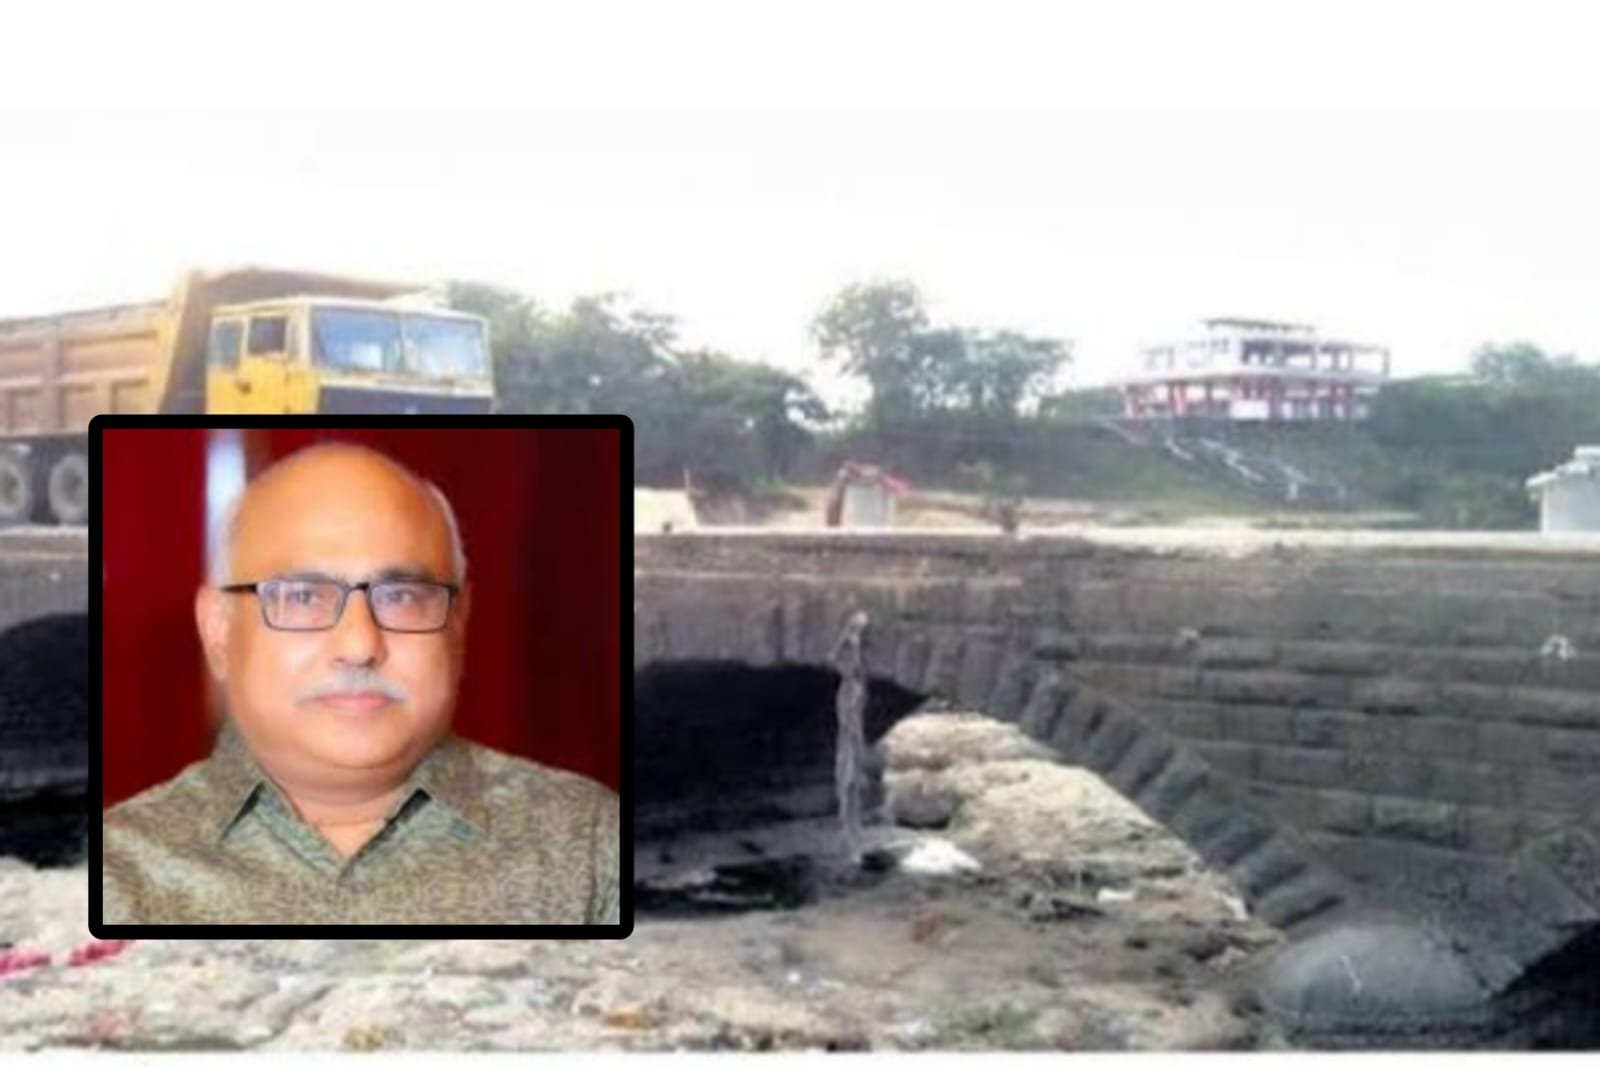 MP Budget: Bridge worth Rs 6.72 crore will be built due to the efforts of Betul MLA